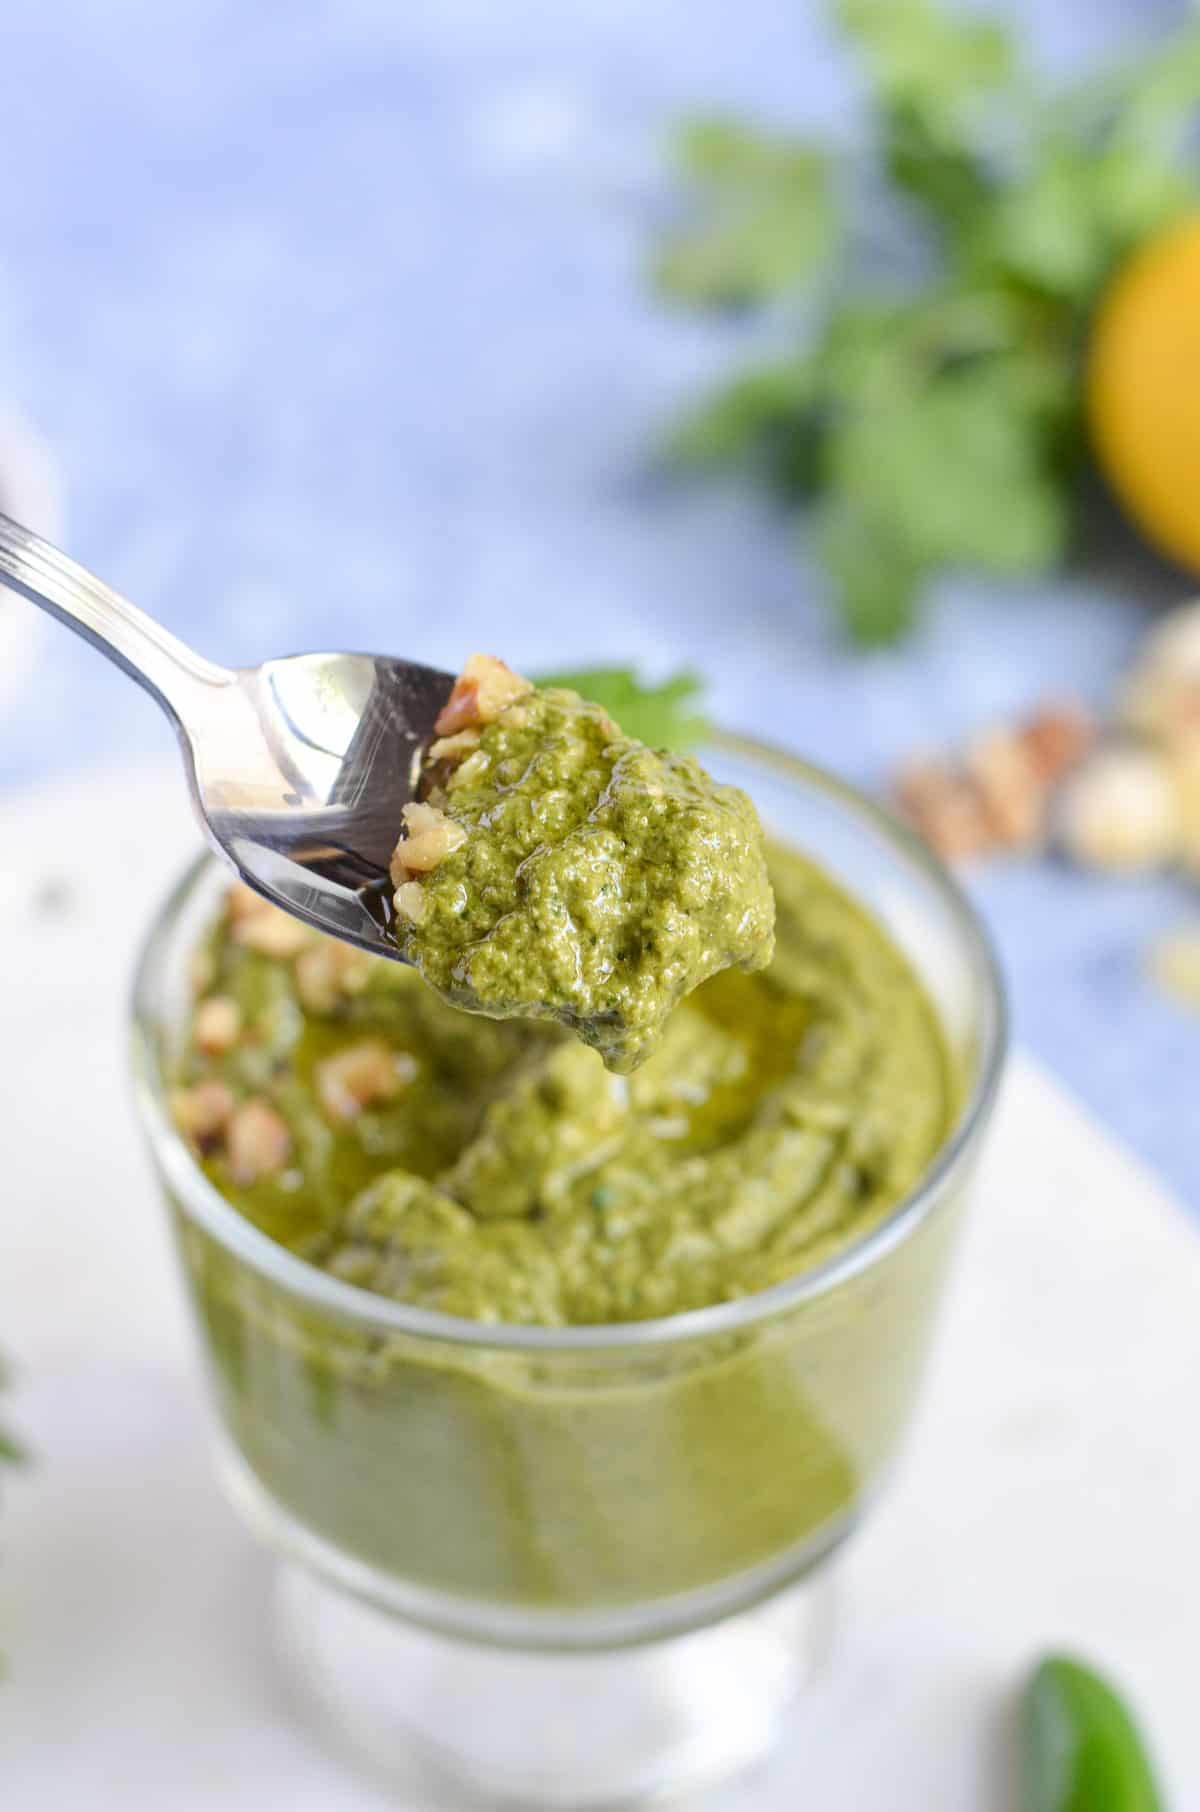 a close up click of pesto shown in a spoon.